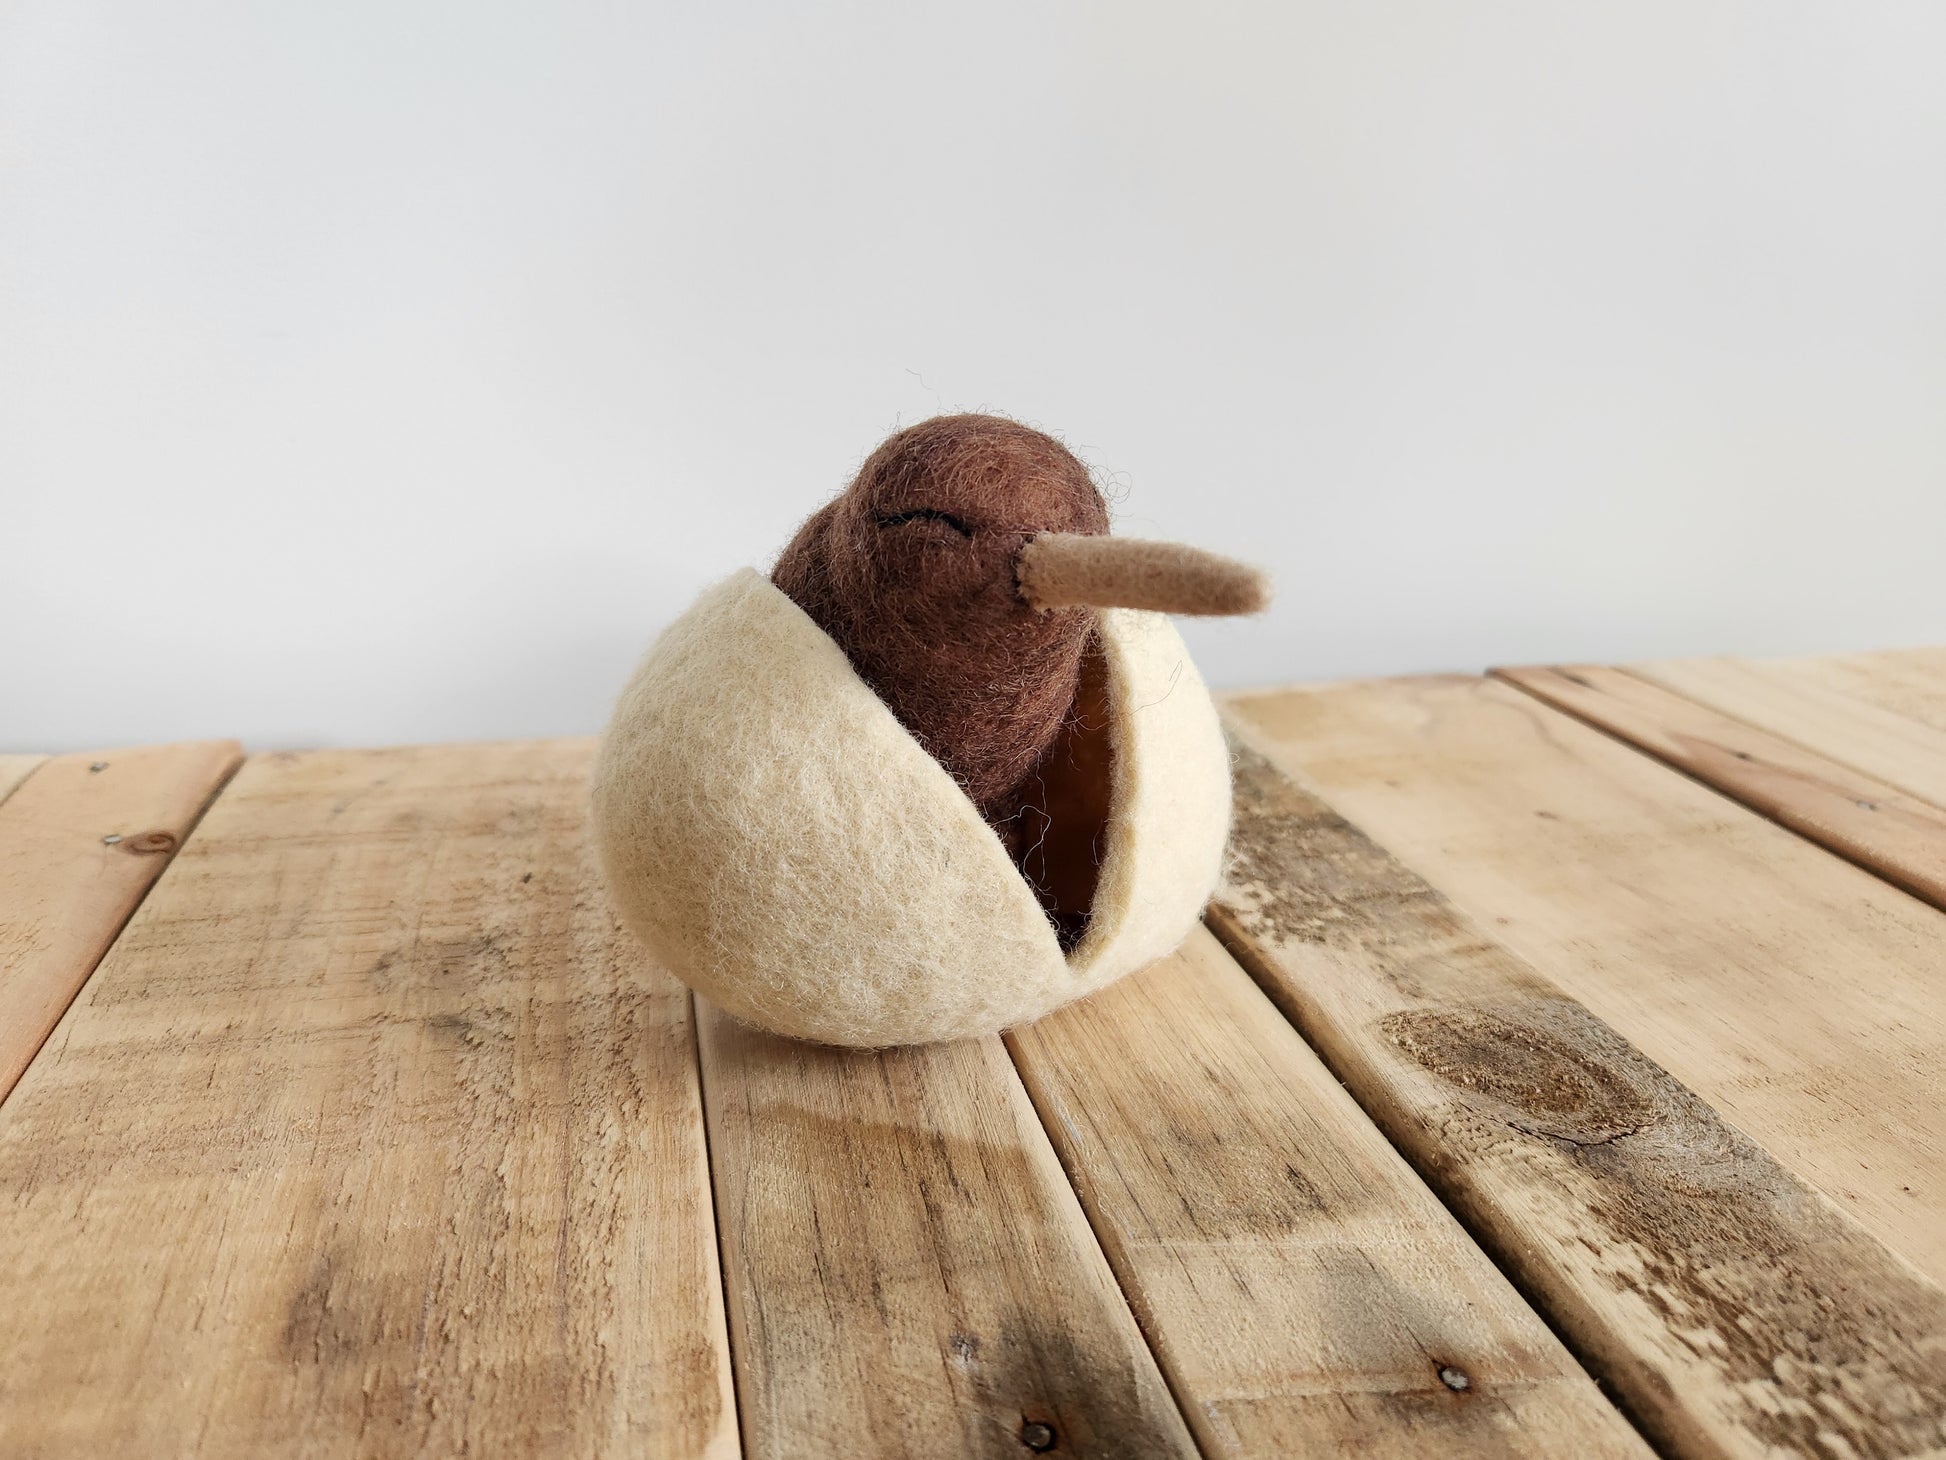 Felted Baby Kiwi Toy in hollow egg